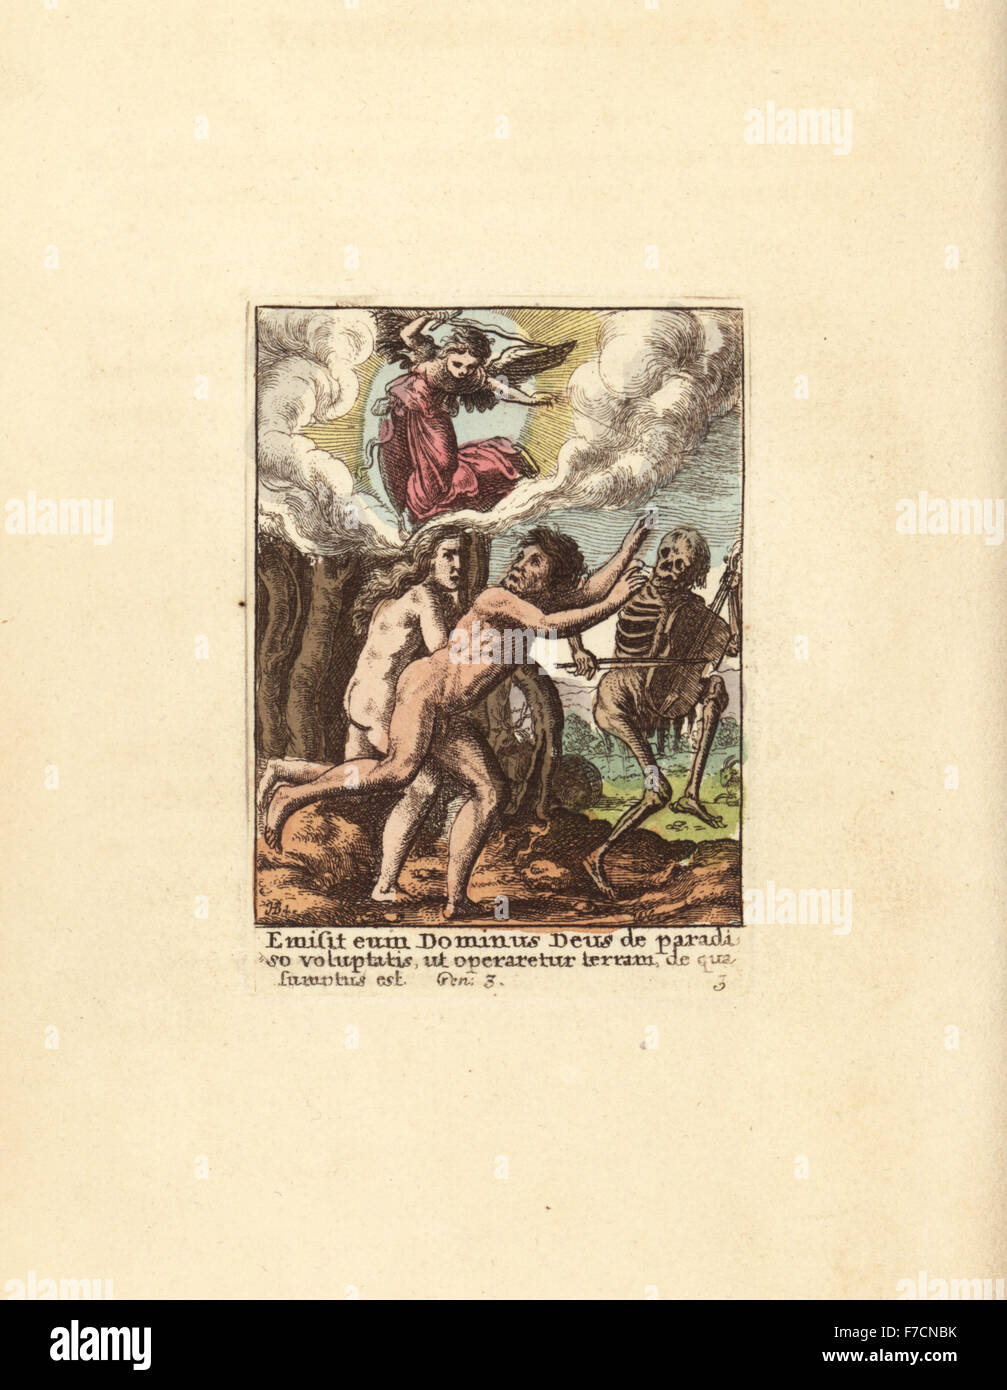 Adam and Eve driven out of the Garden of Eden by an angel and accompanied by a skeleton playing a fiddle. Handcoloured copperplate engraving by Wenceslaus Hollar from The Dance of Death by Hans Holbein, Coxhead, London, 1816. Stock Photo